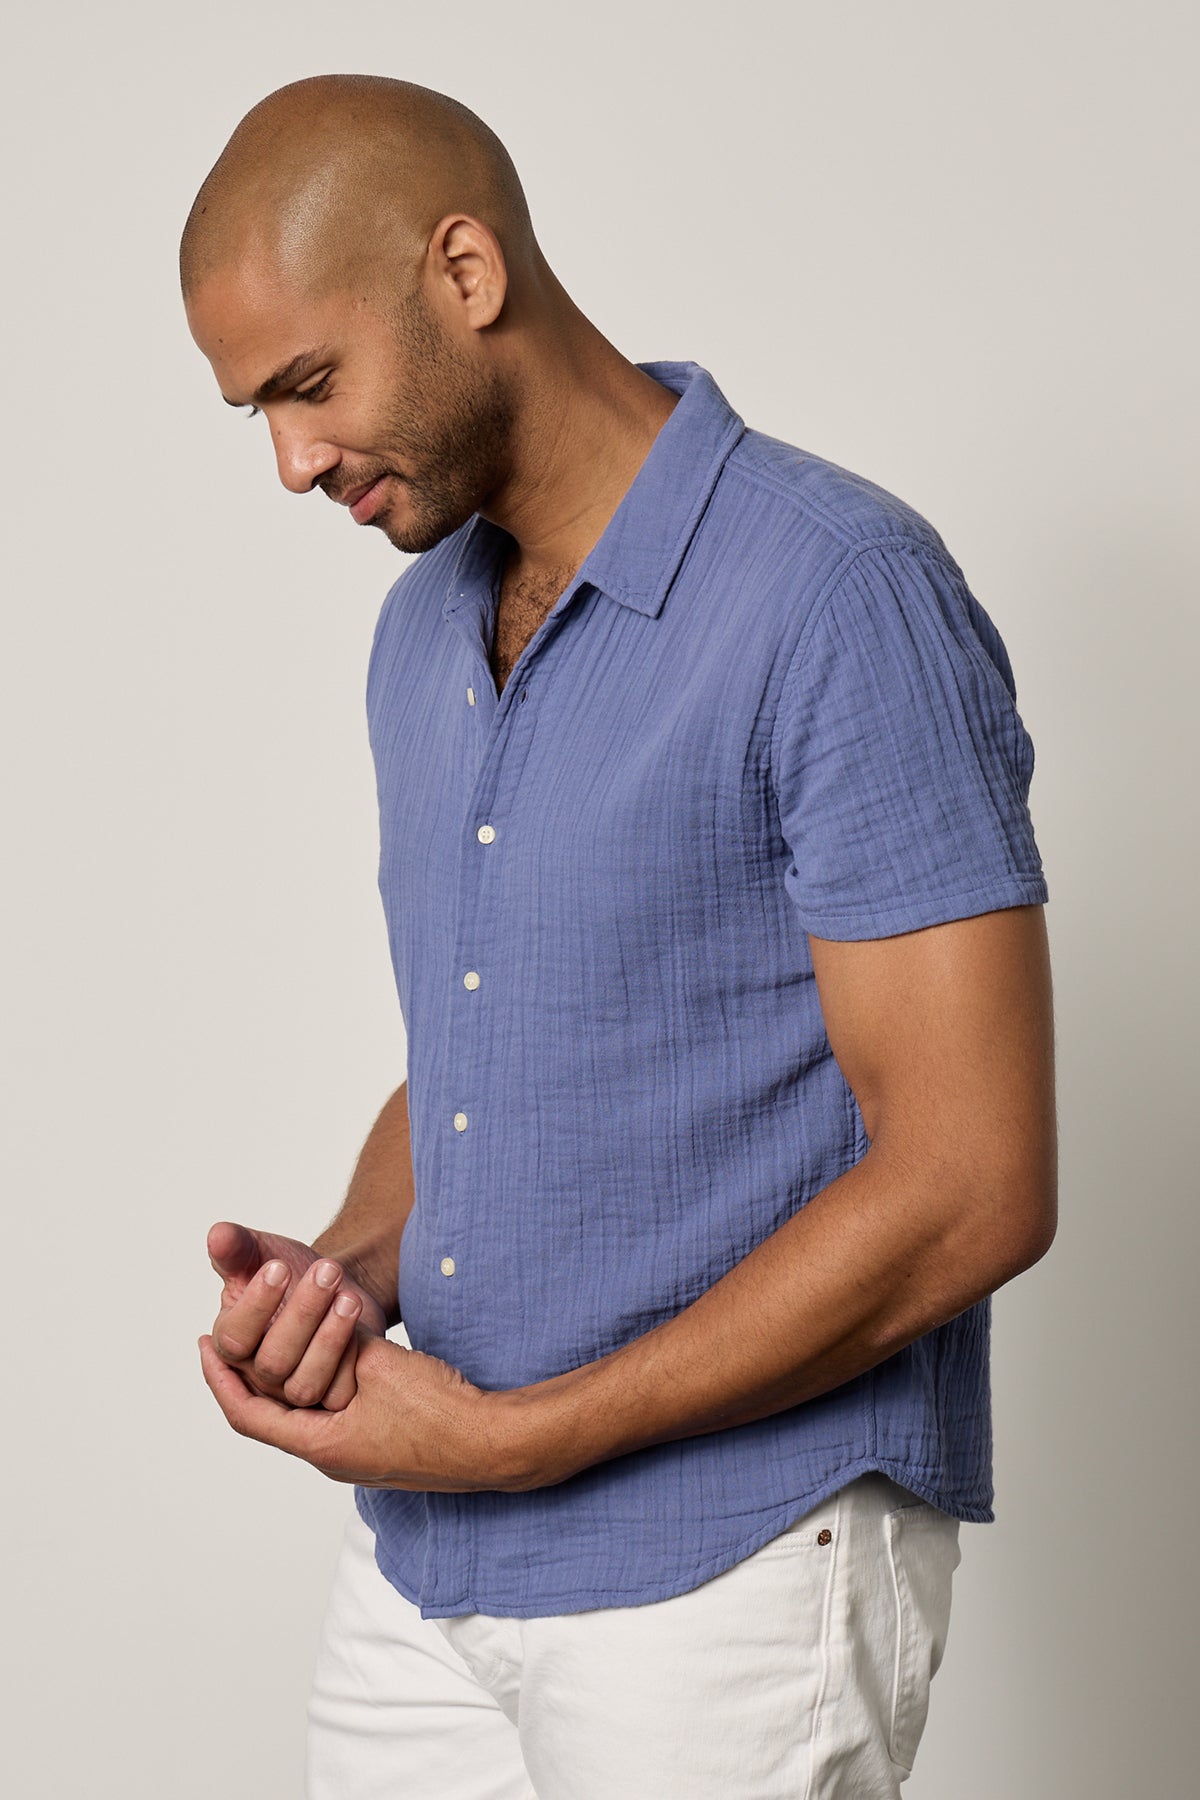 Christian Shirt in citadel blue with white denim front & side-26266328400065